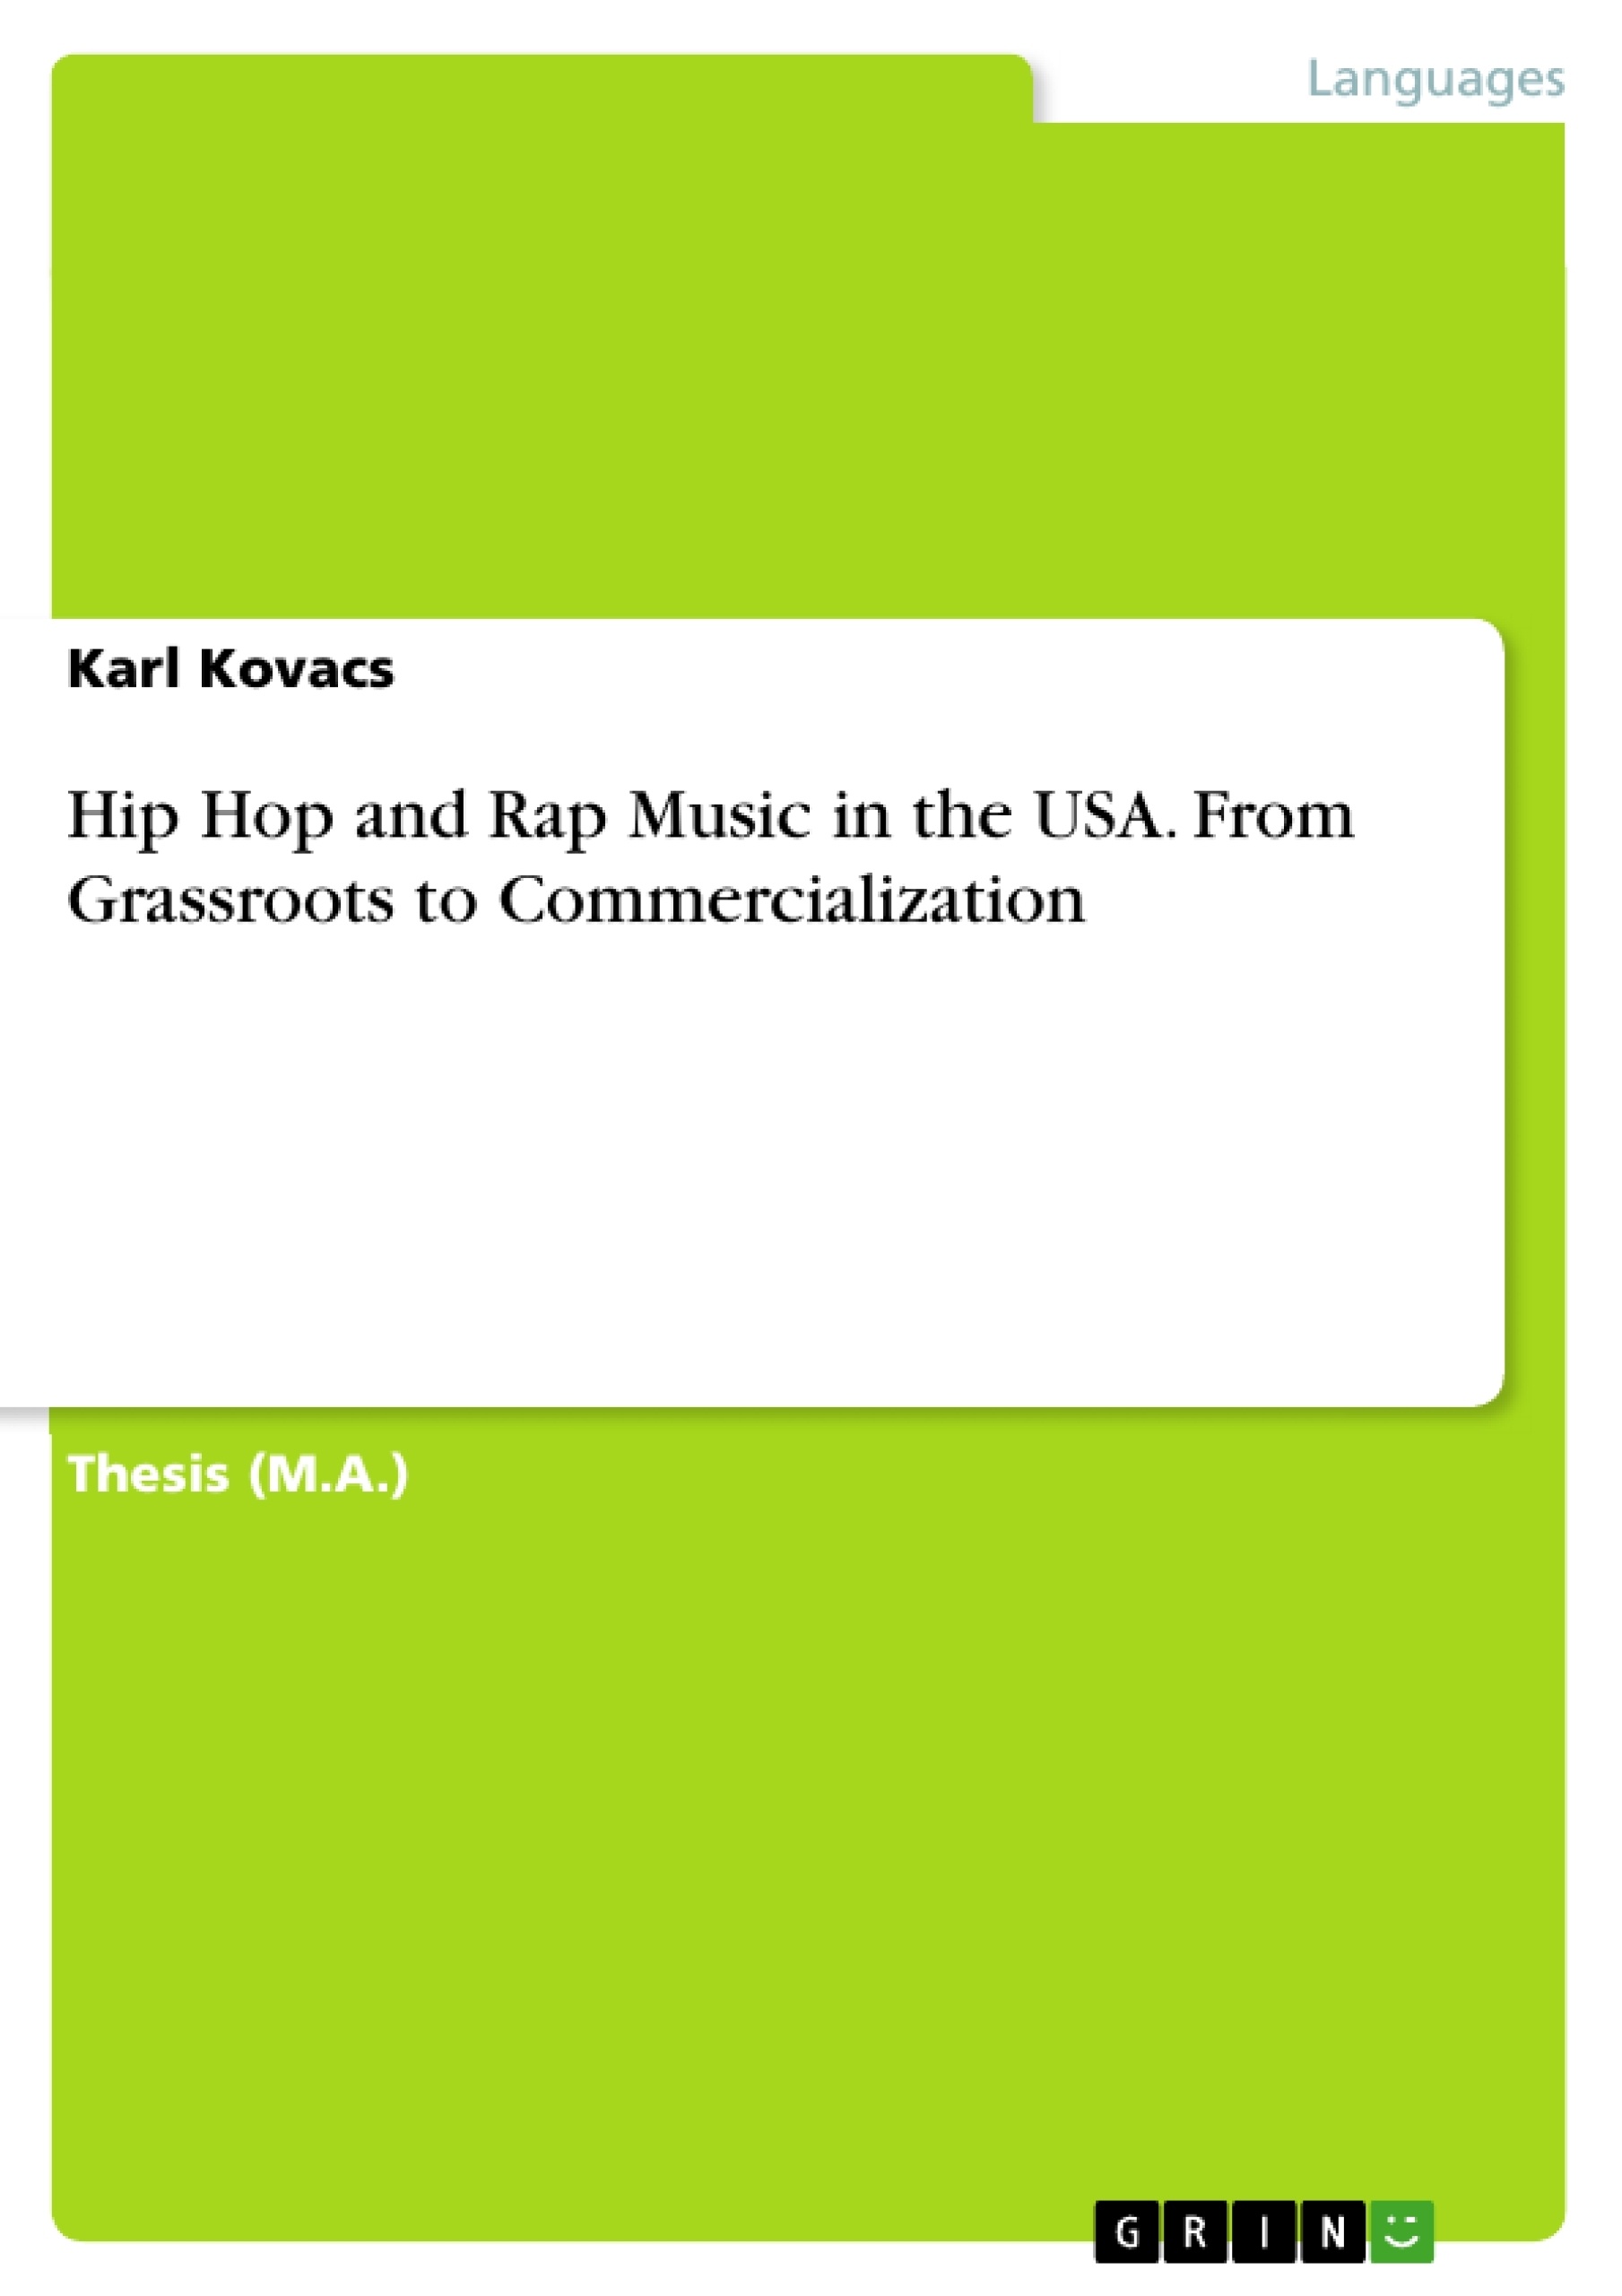 Title: Hip Hop and Rap Music in the USA. From Grassroots to Commercialization